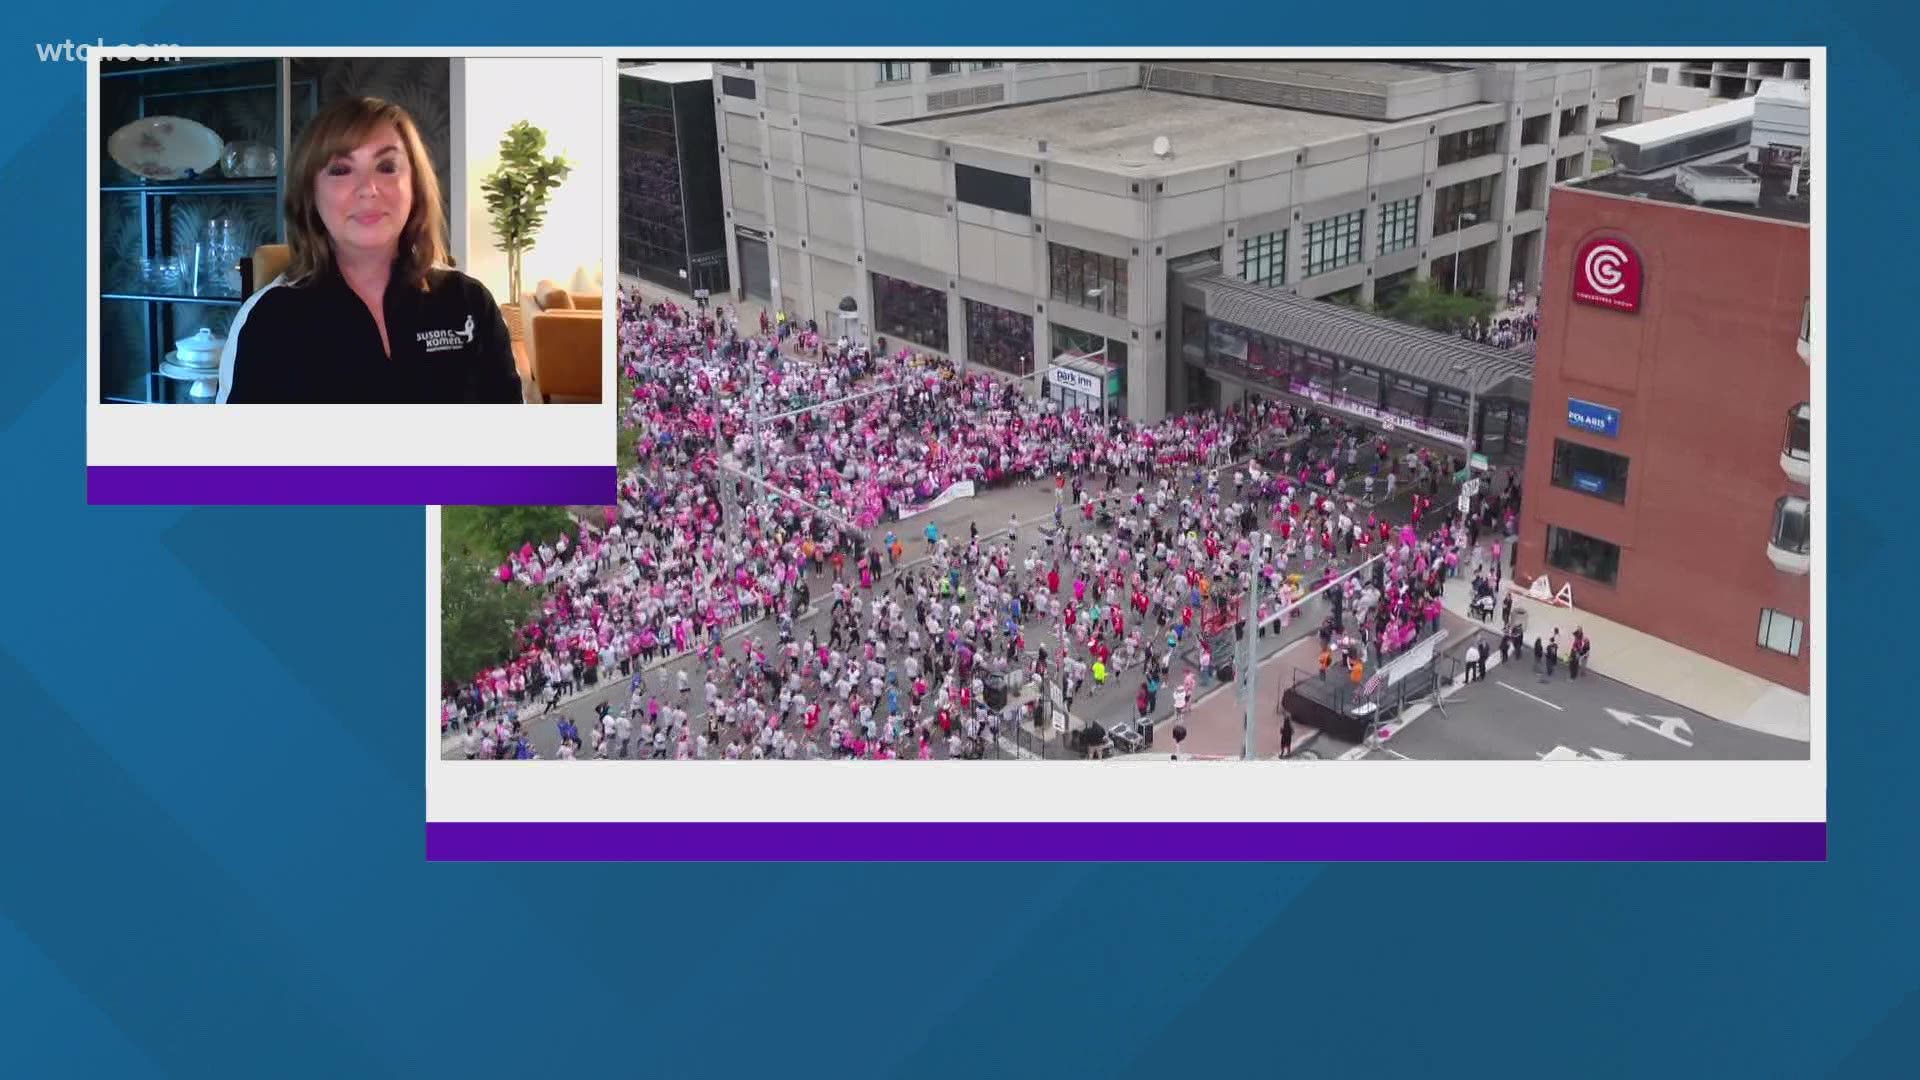 The popular 5K runs and fitness walks raise money for breast cancer research, care, community, and action, according to Susan G. Komen Northwest Ohio.